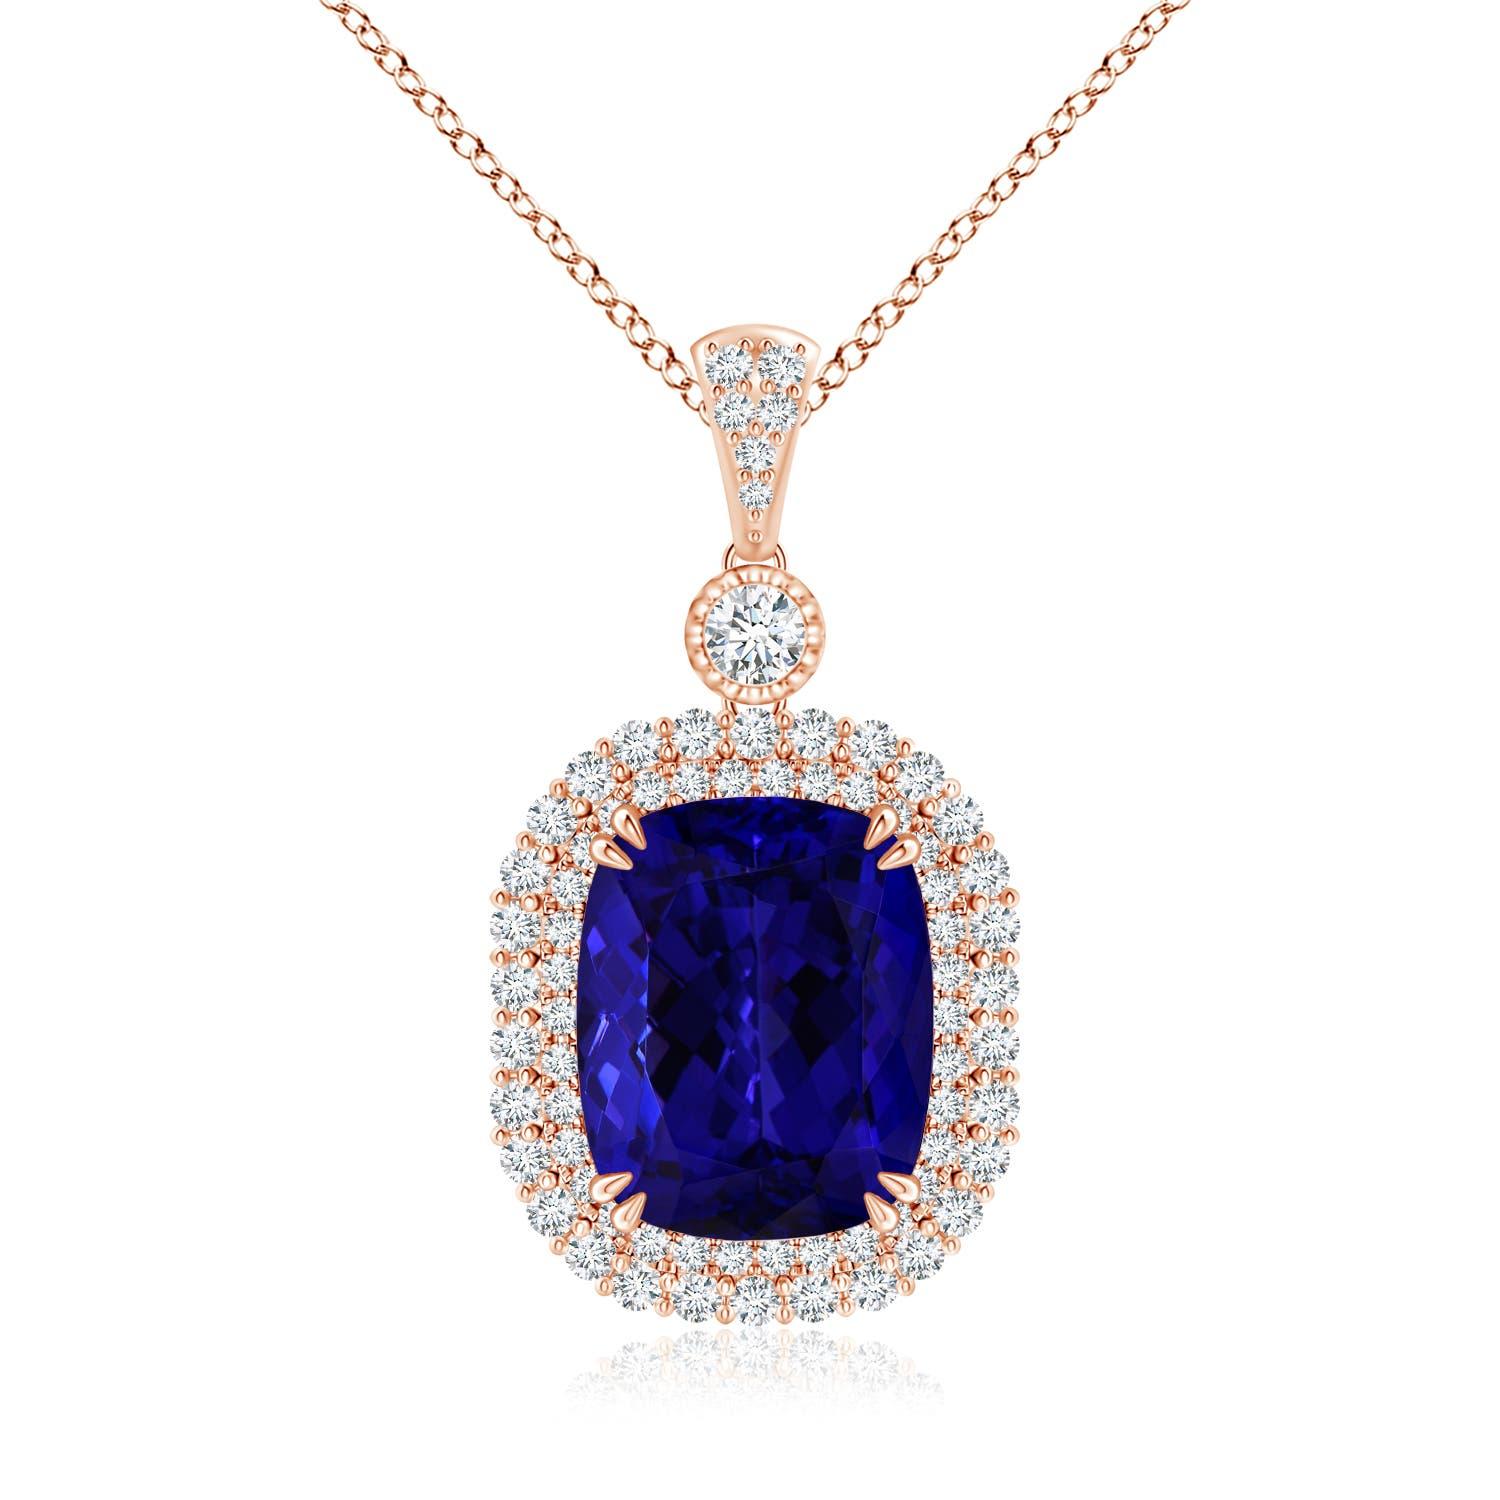 Angara GIA Certified Natural Tanzanite Double Halo Rose Gold Pendant Necklace